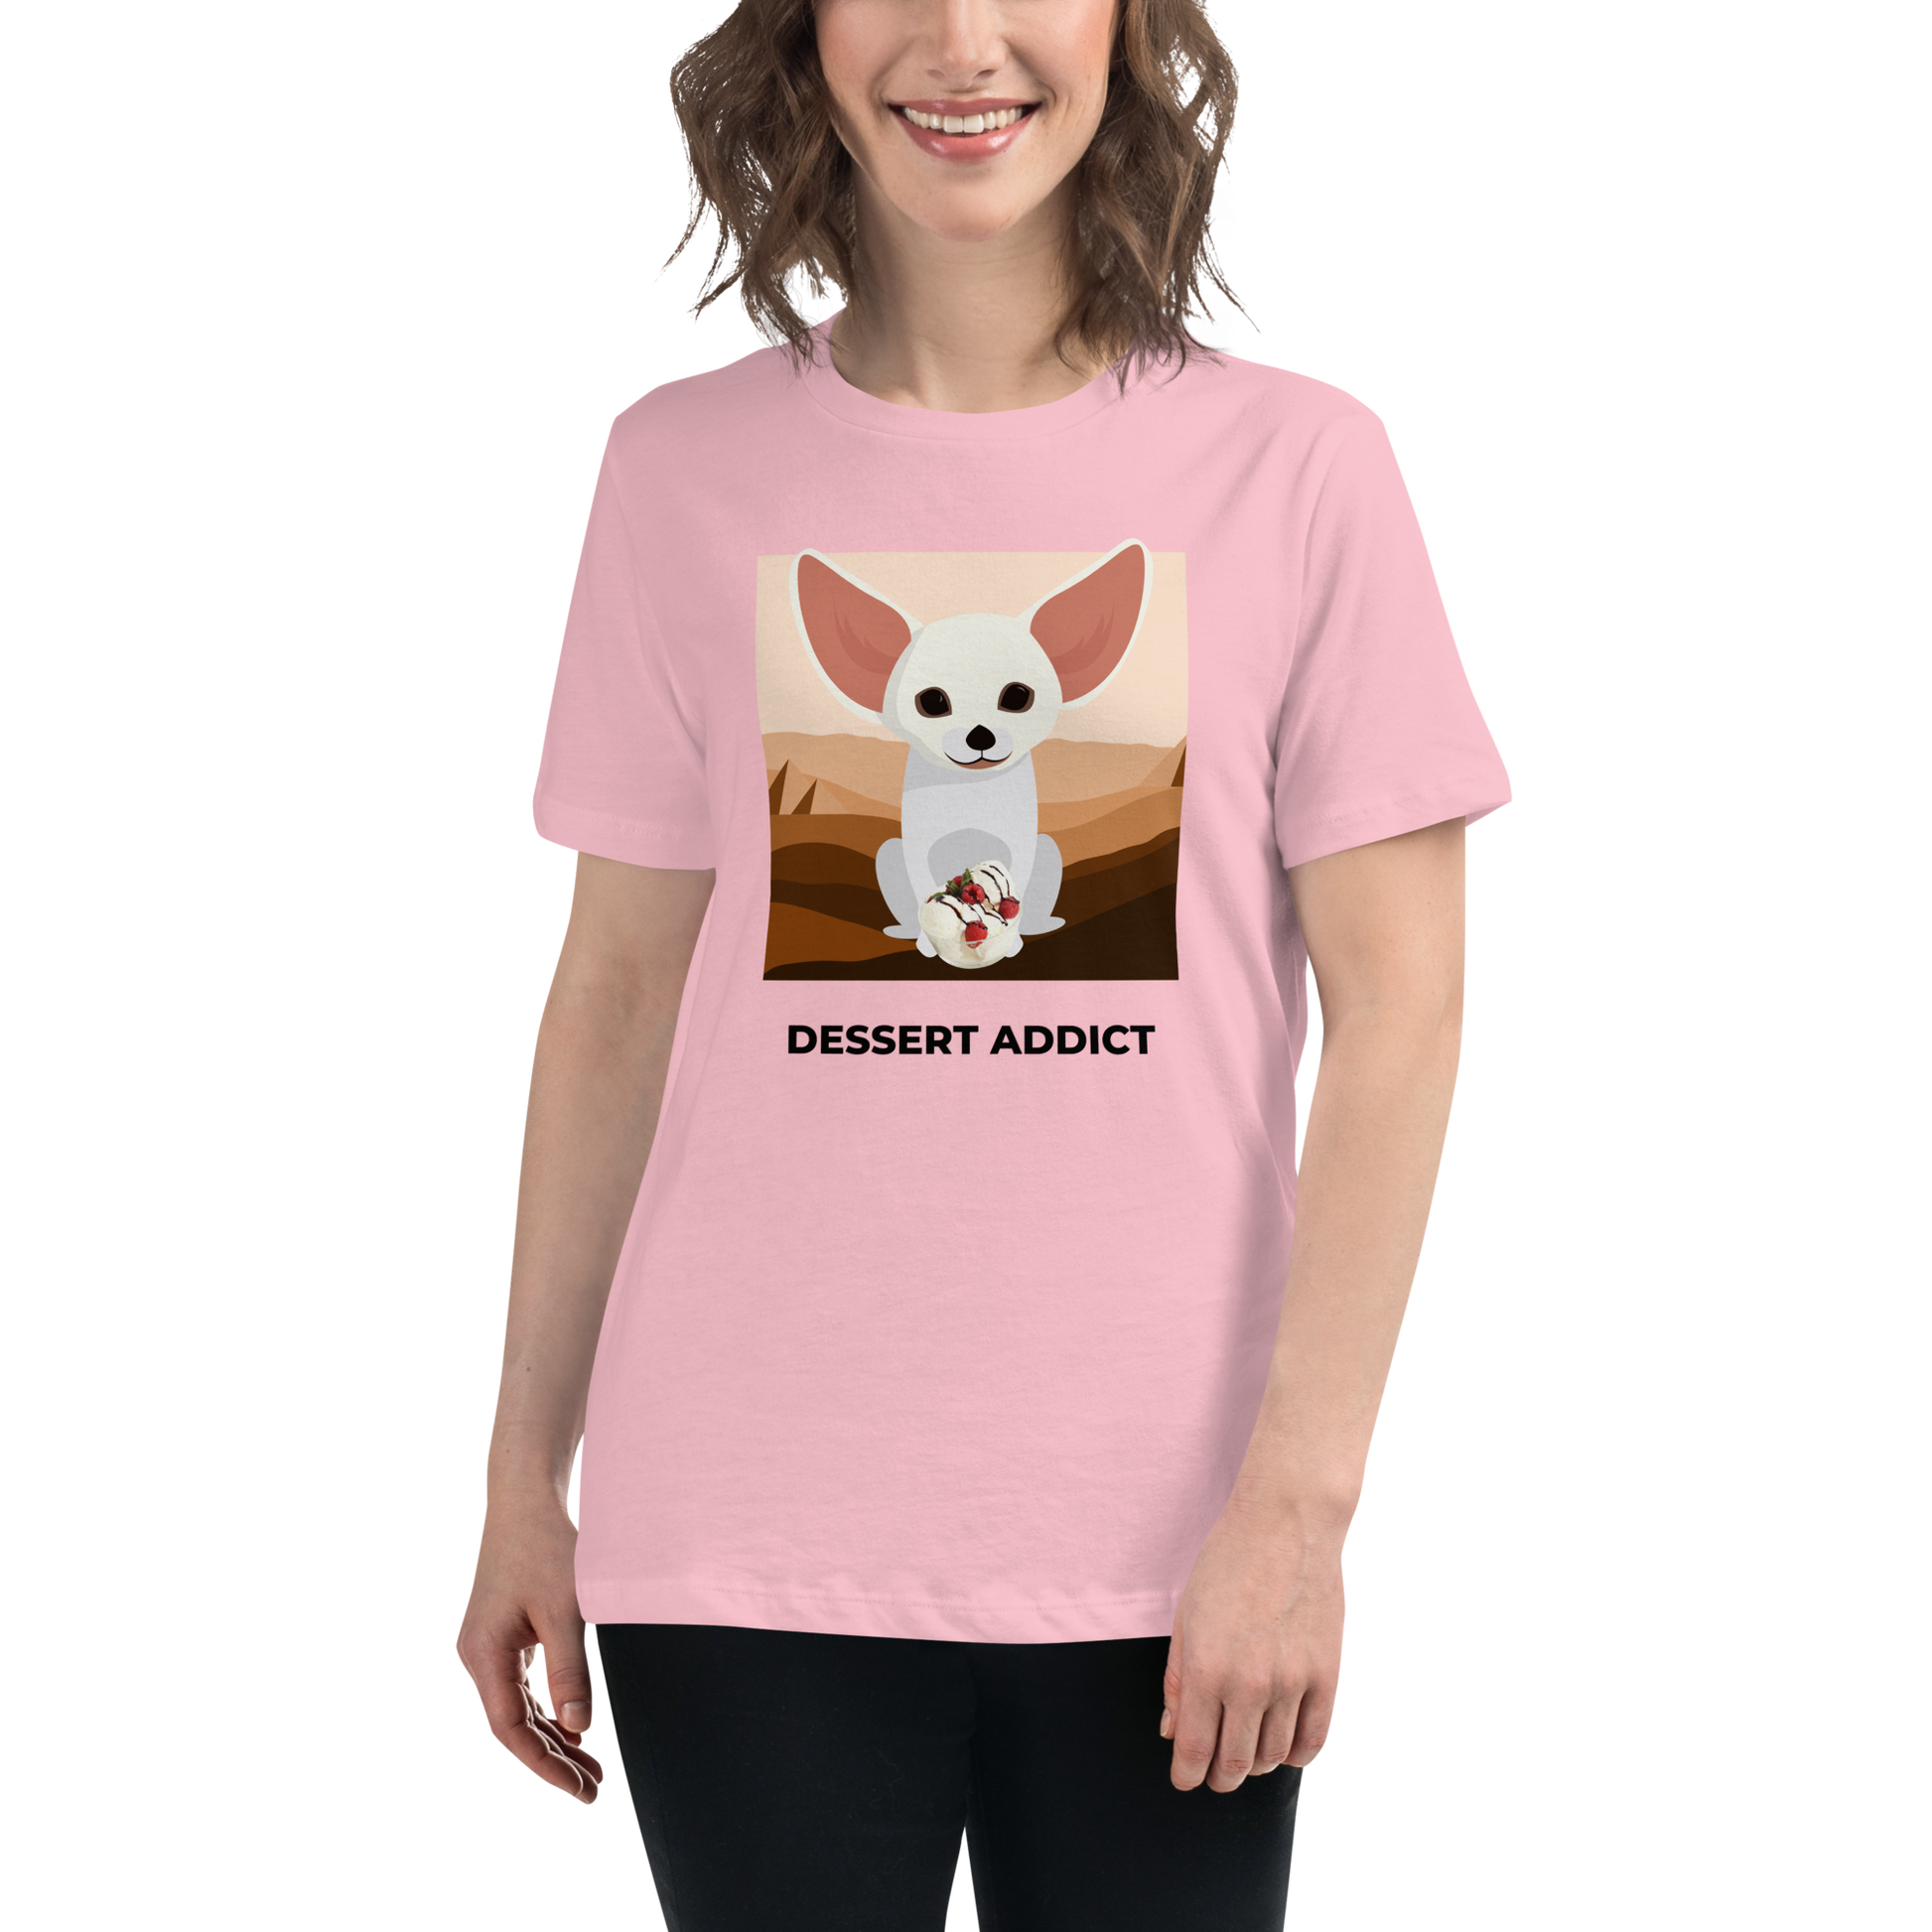 Smiling Woman Wearing a Women's relaxed pink Fennec Fox t-shirt featuring a cute Dessert Addict graphic on the chest - Women's Cute Graphic Fennec Fox Tees - Boozy Fox